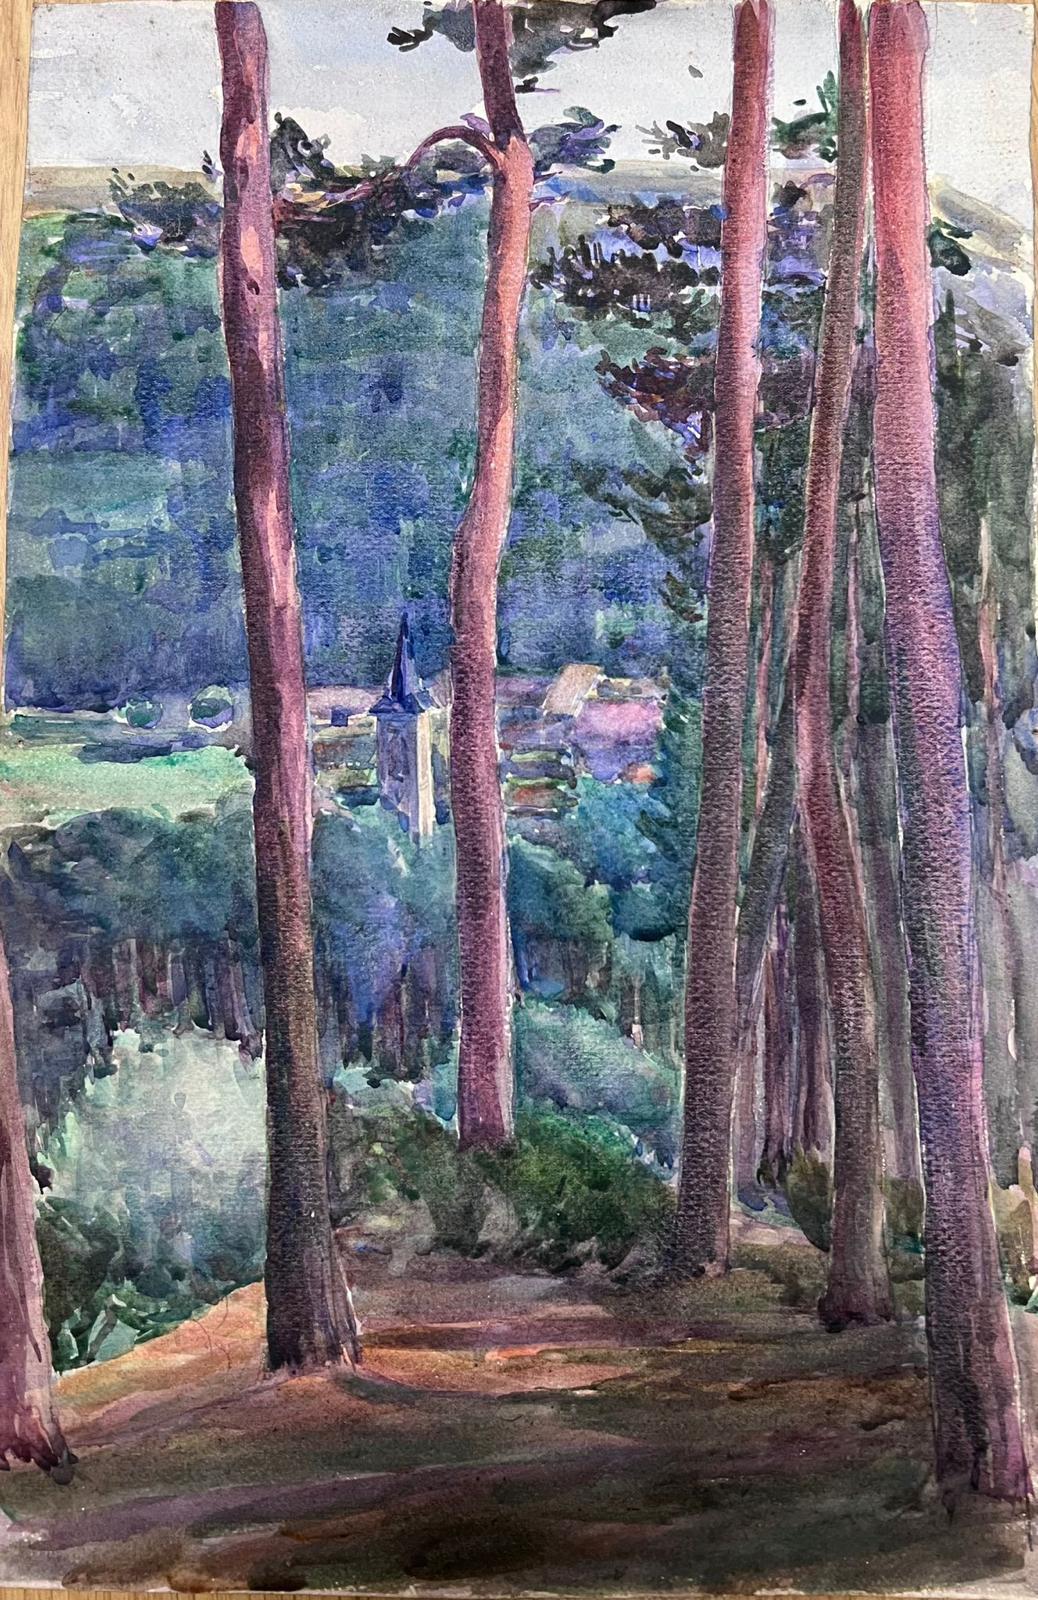 Vintage French Oil Painting
by Louise Alix (French, 1888-1980) *see notes below
provenance stamp to the back 
watercolour painting on artist paper, unframed
measures: 16.5 inches high by 11 inches wide
condition: overall very good and sound, a few